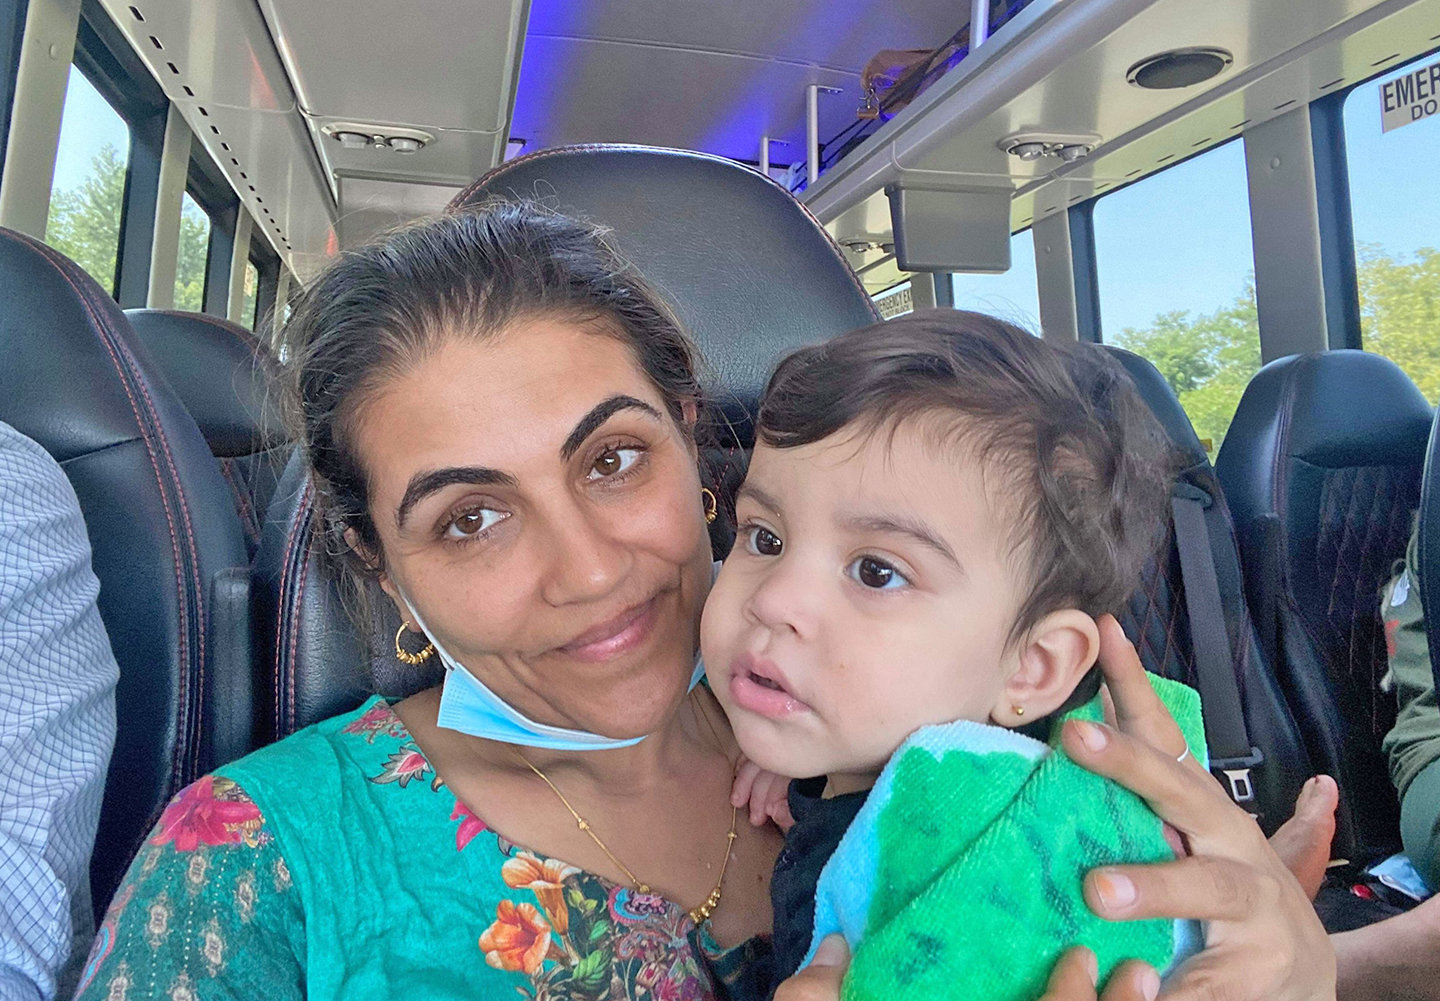 GOING HOME — Faziya Nematy, of Schenectady, holds one of her children during their Hale Transportation bus ride back home Thursday after escaping from Afghanistan with the help of two New Hartford Volunteer Firefighters Sean D. Mahoney and John Jensen.